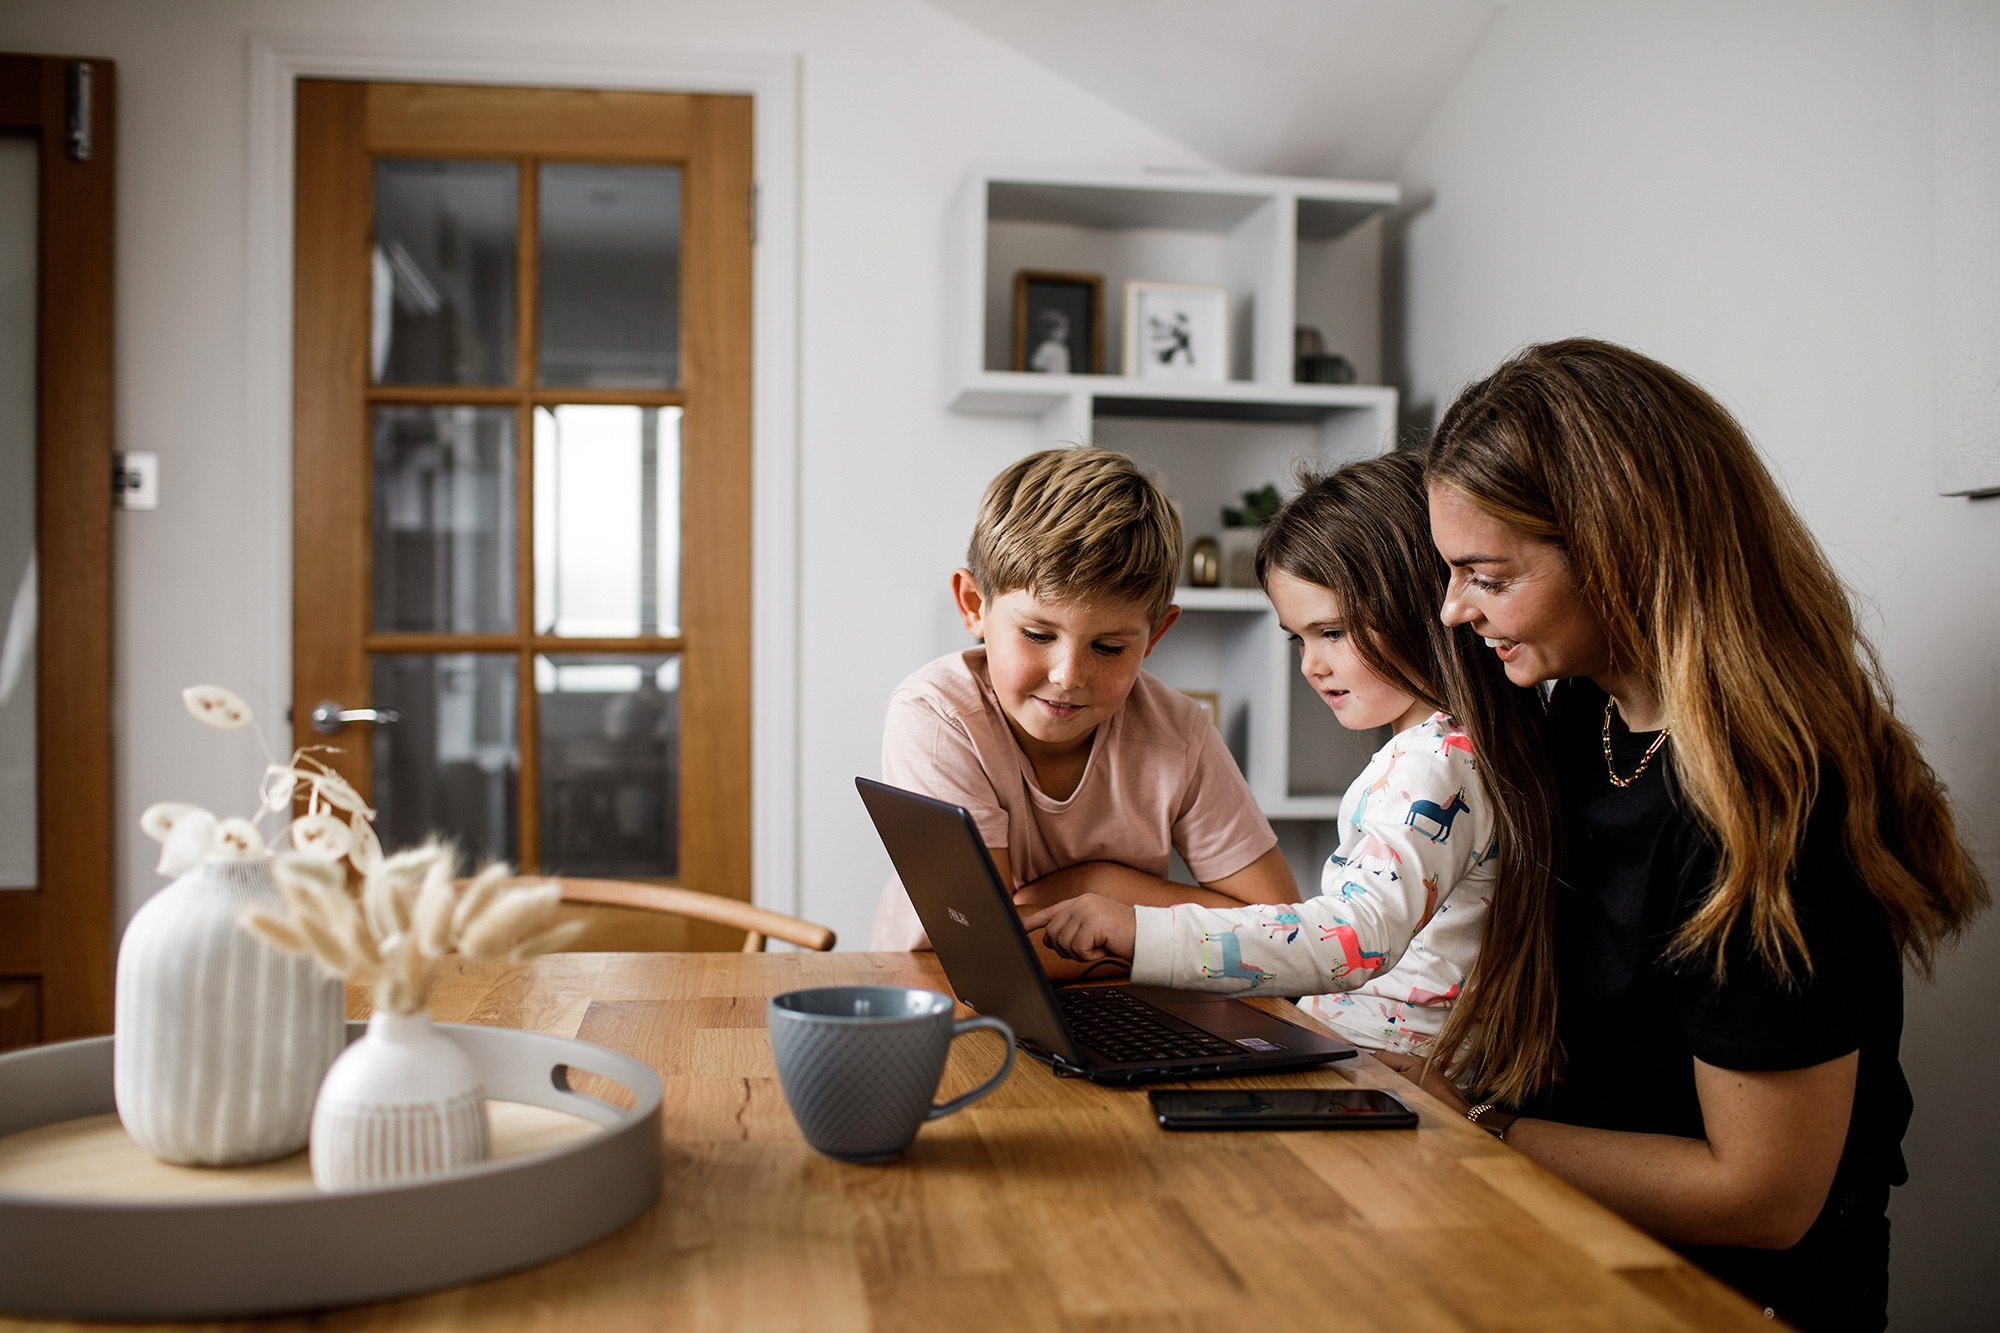 A mother and her children sat at the kitchen table enjoying something on a laptop computer.